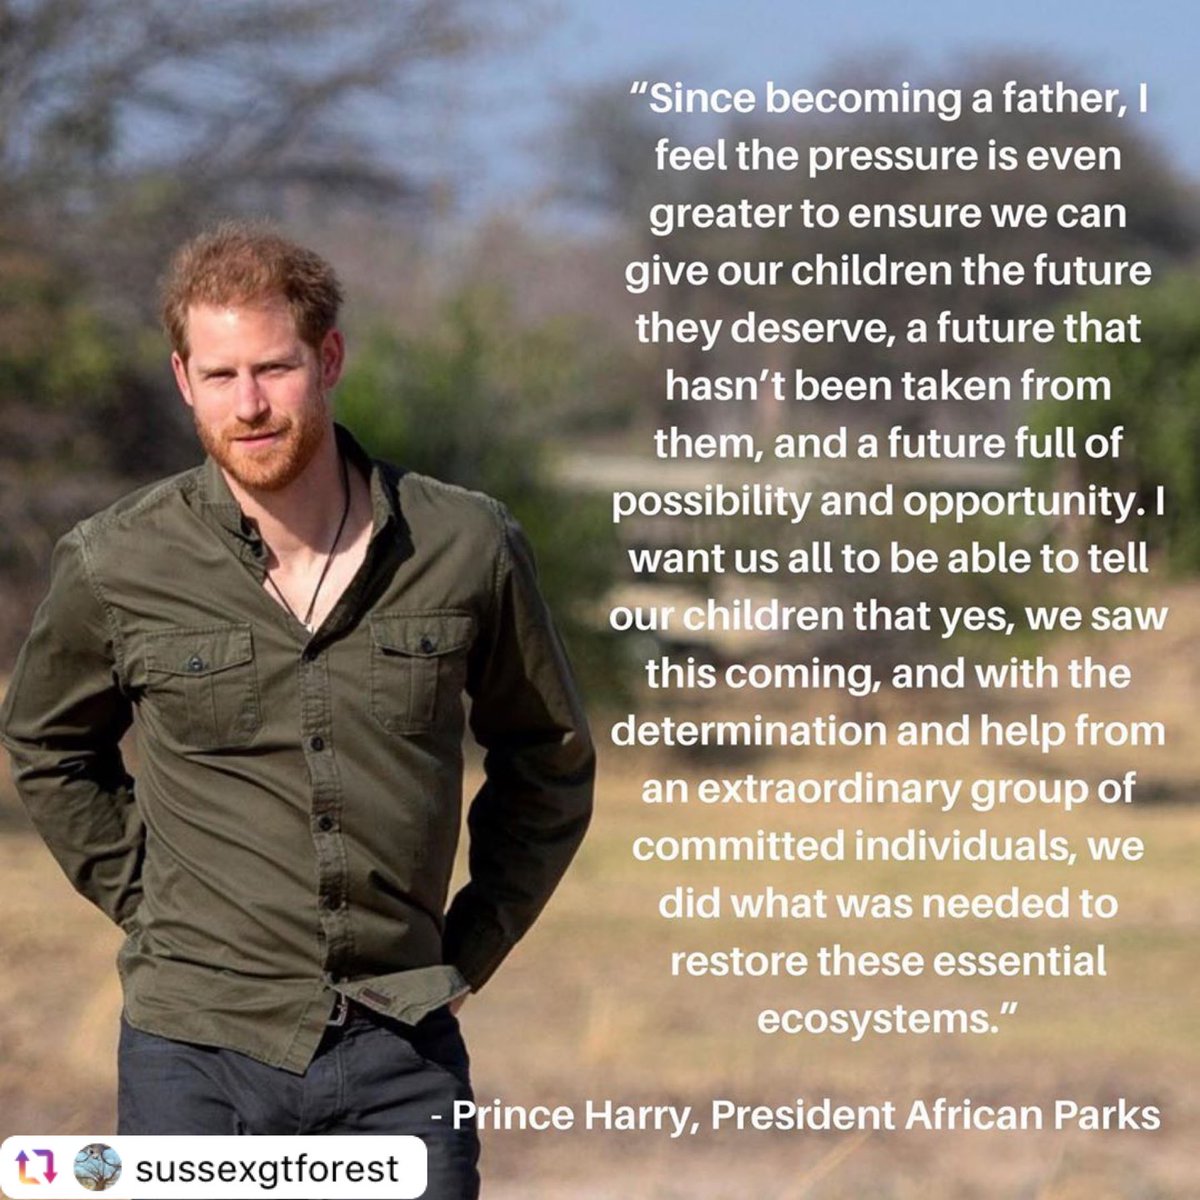 #PrinceHarryisright 

We need to do more to take #ClimateActionNow. There is no #PlanetB.